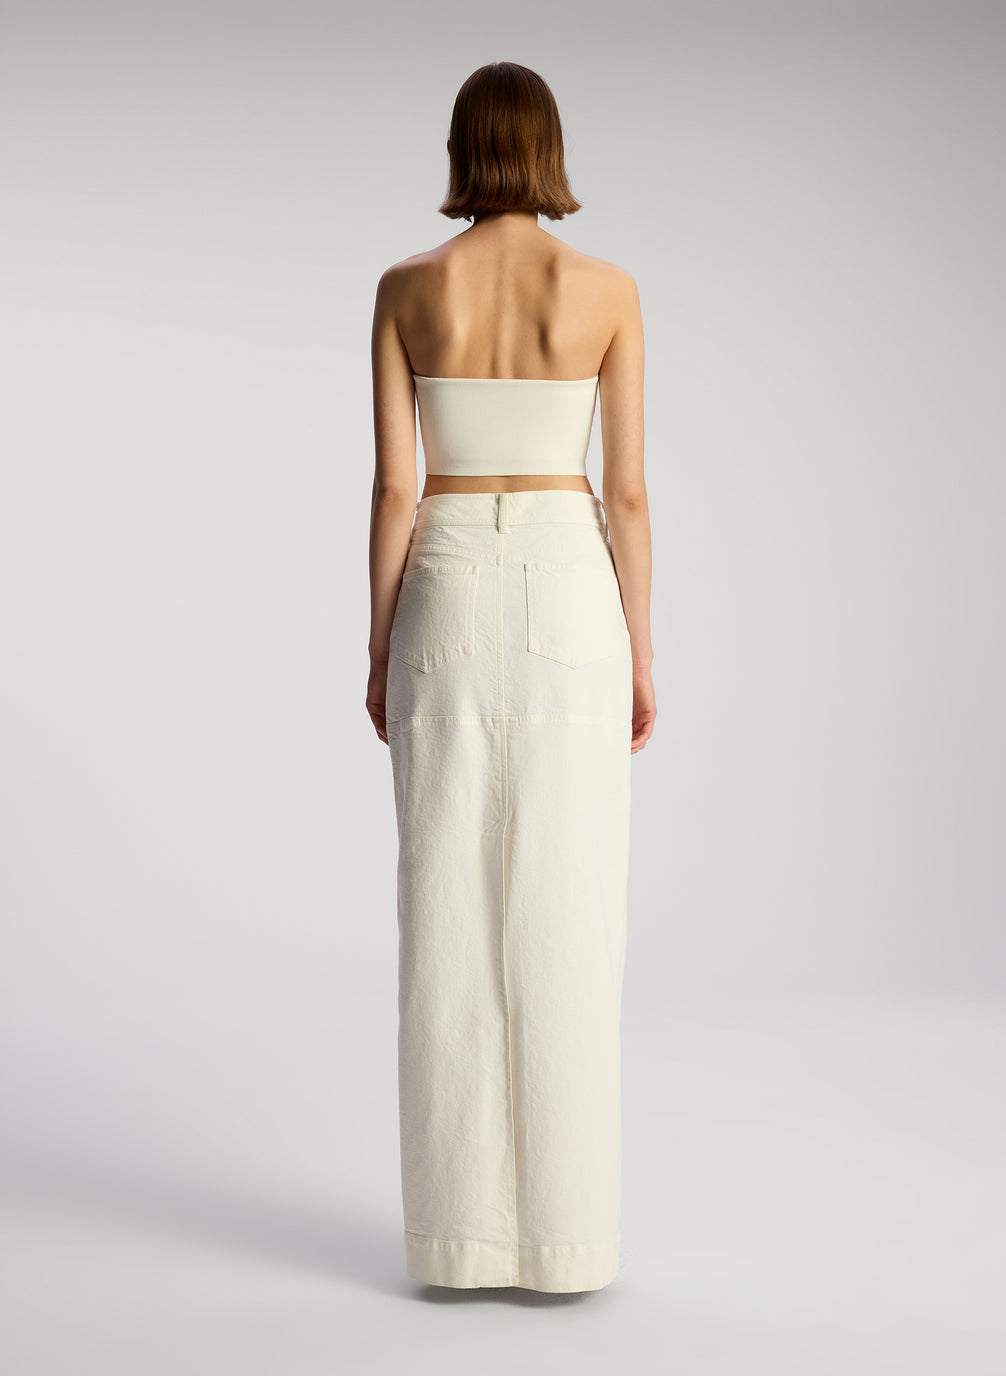 back view of woman wearing off white cropped strapless top with white maxi skirt